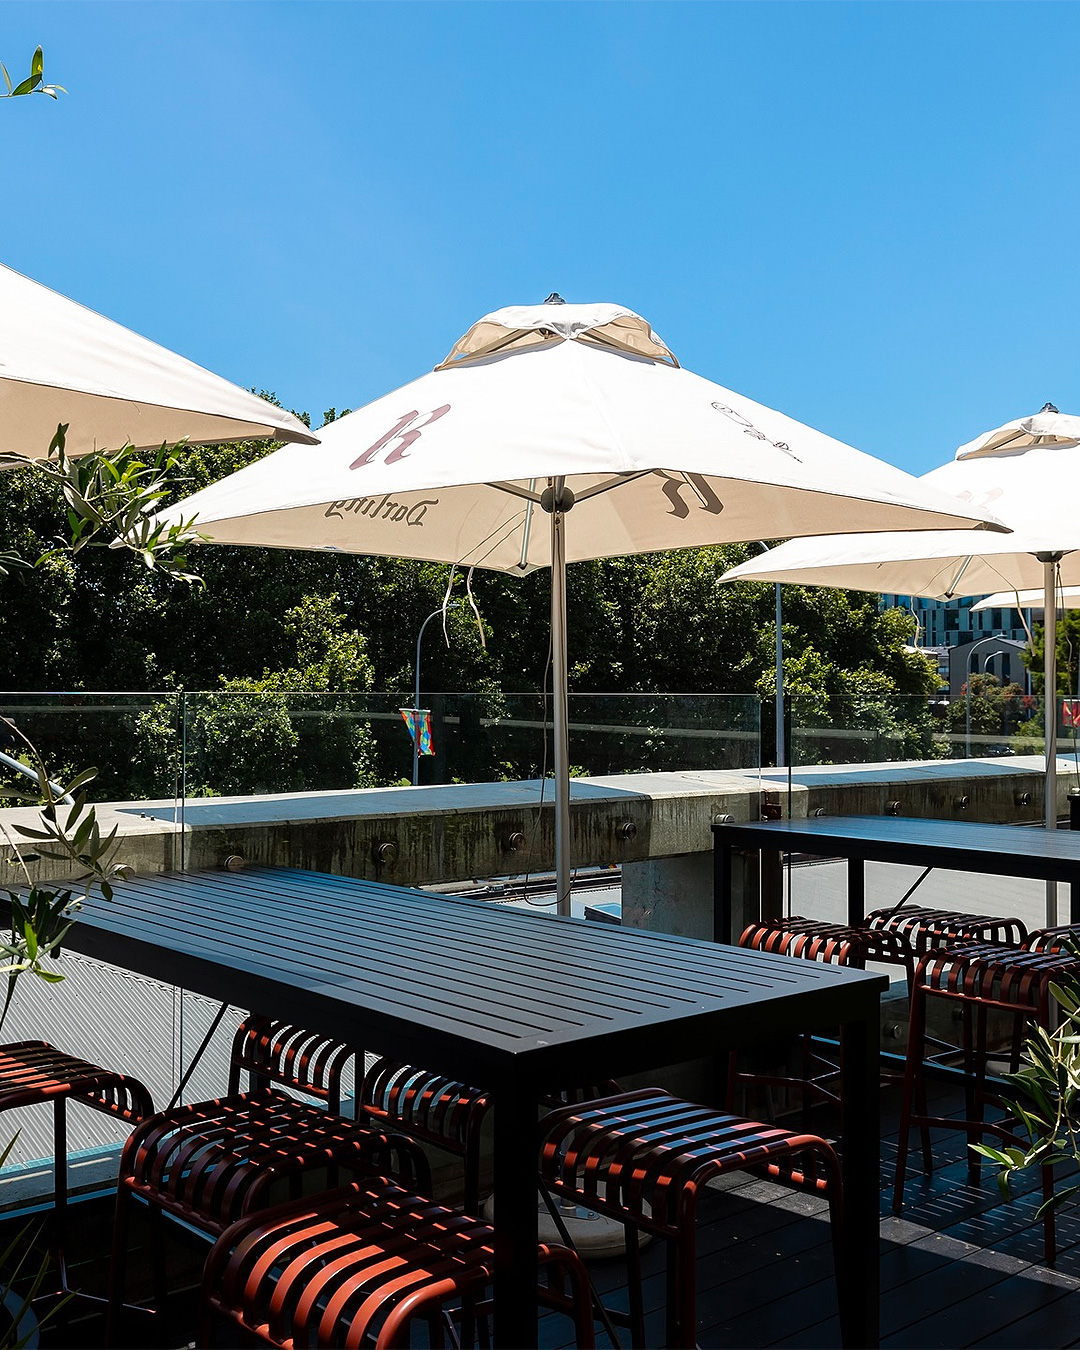 The rooftop bar Darling on Drake with sun umbrellas and cool seating.